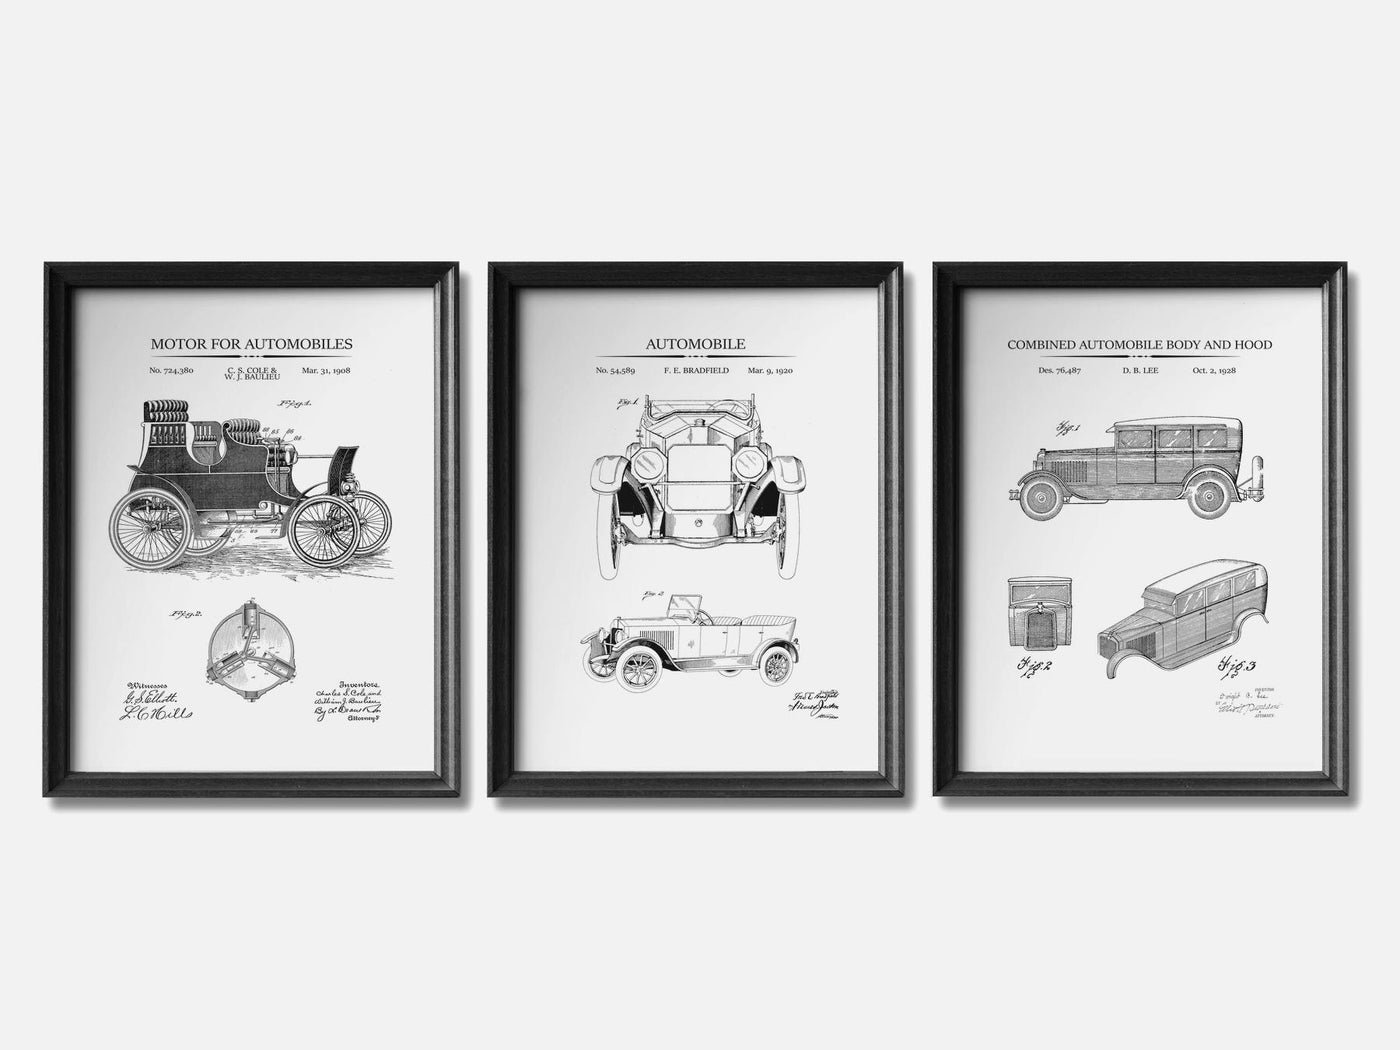 Early 20th Century Cars - Patent Print Set of 3 mockup - A_t10133-V1-PC_F+B-SS_3-PS_11x14-C_whi variant